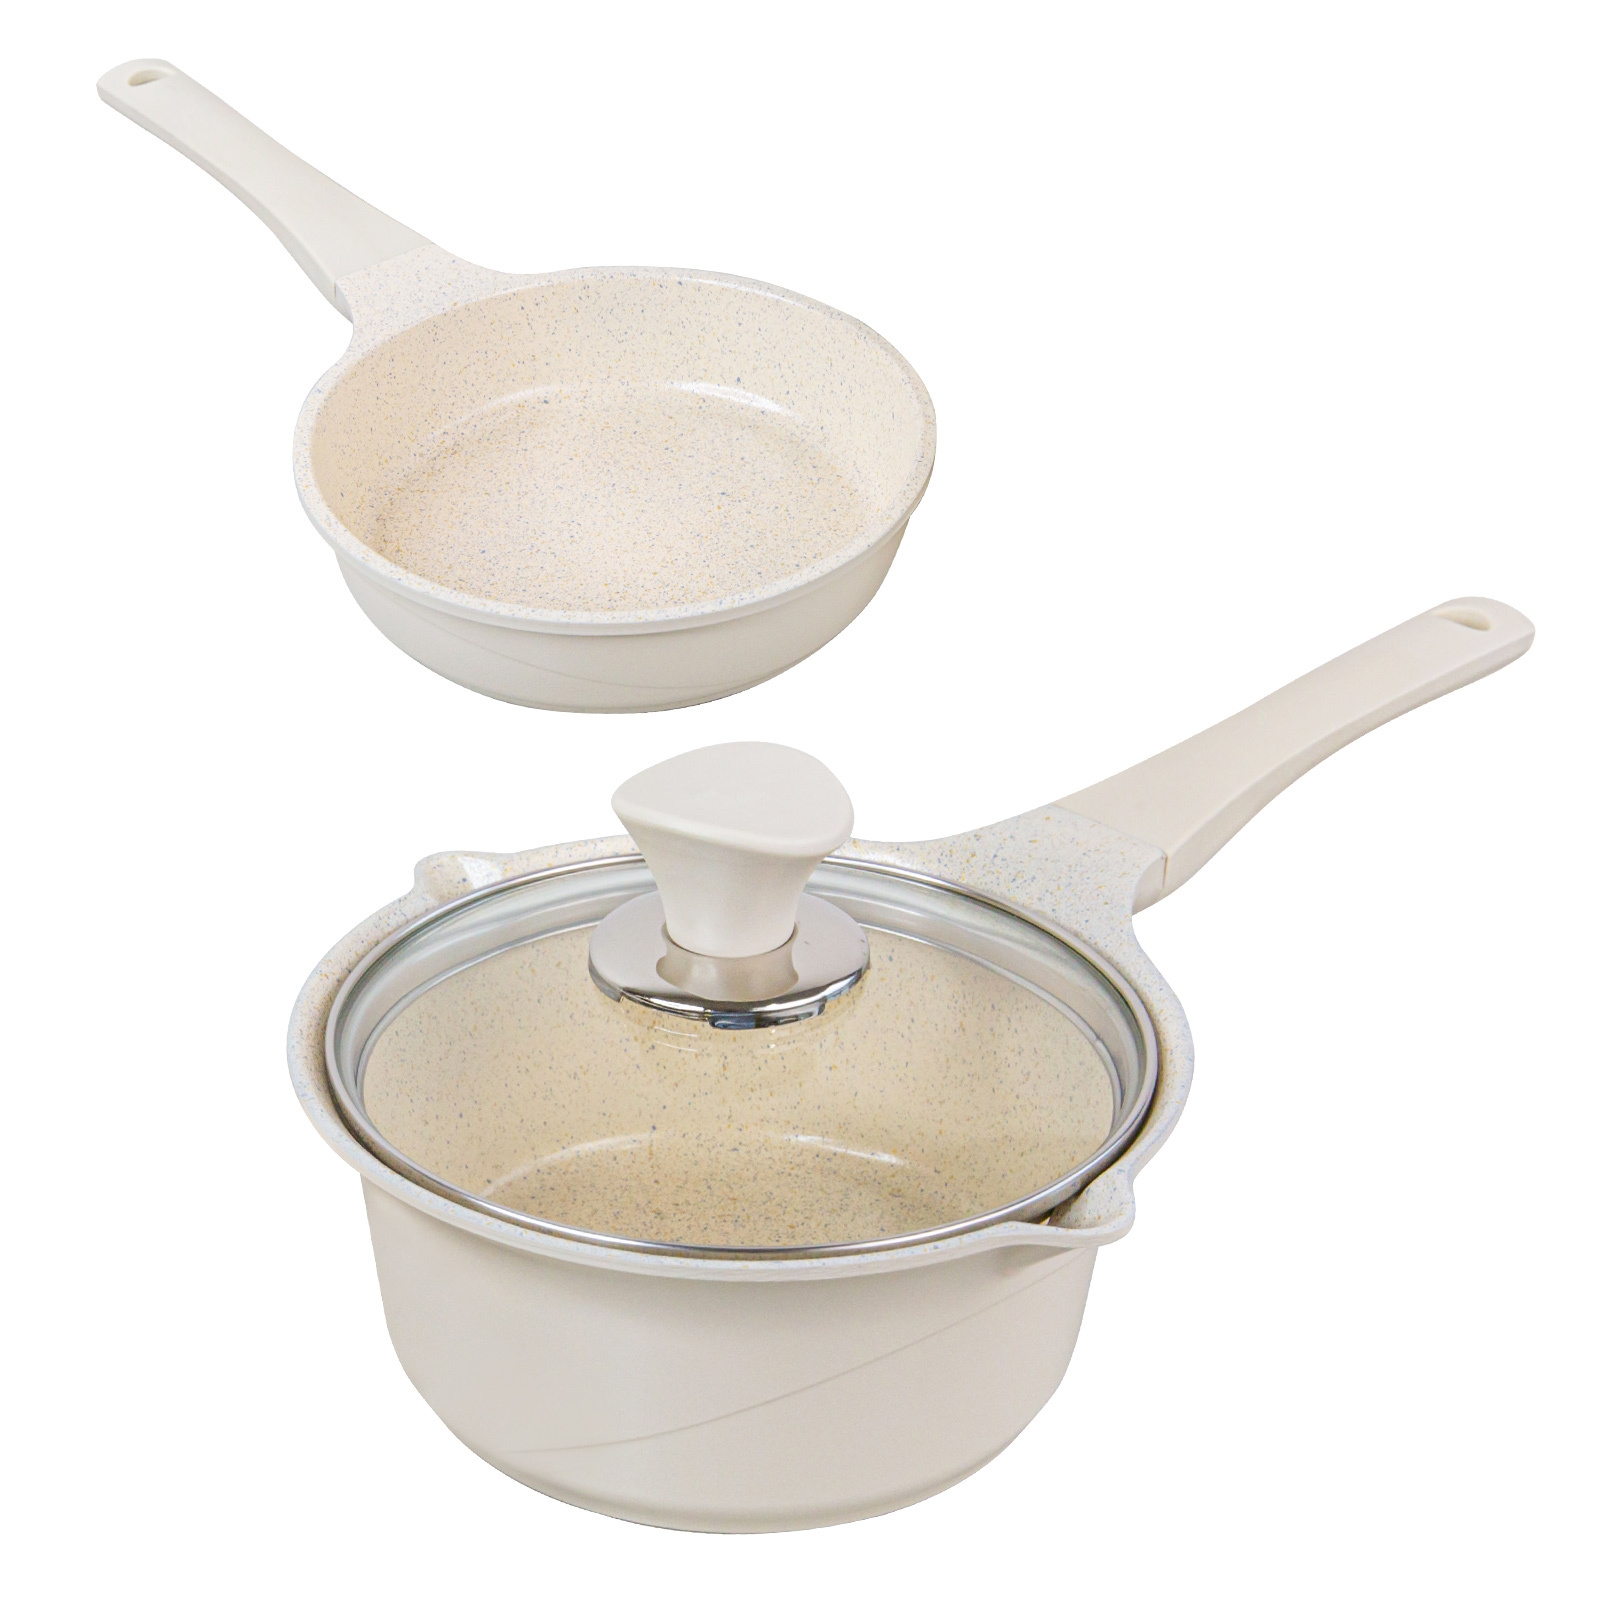 Happy Lambs 16cm Sauce Pot Frying Pan w/ a Lid Set Non-Stick Stone Induction IH Frypan – Ivory